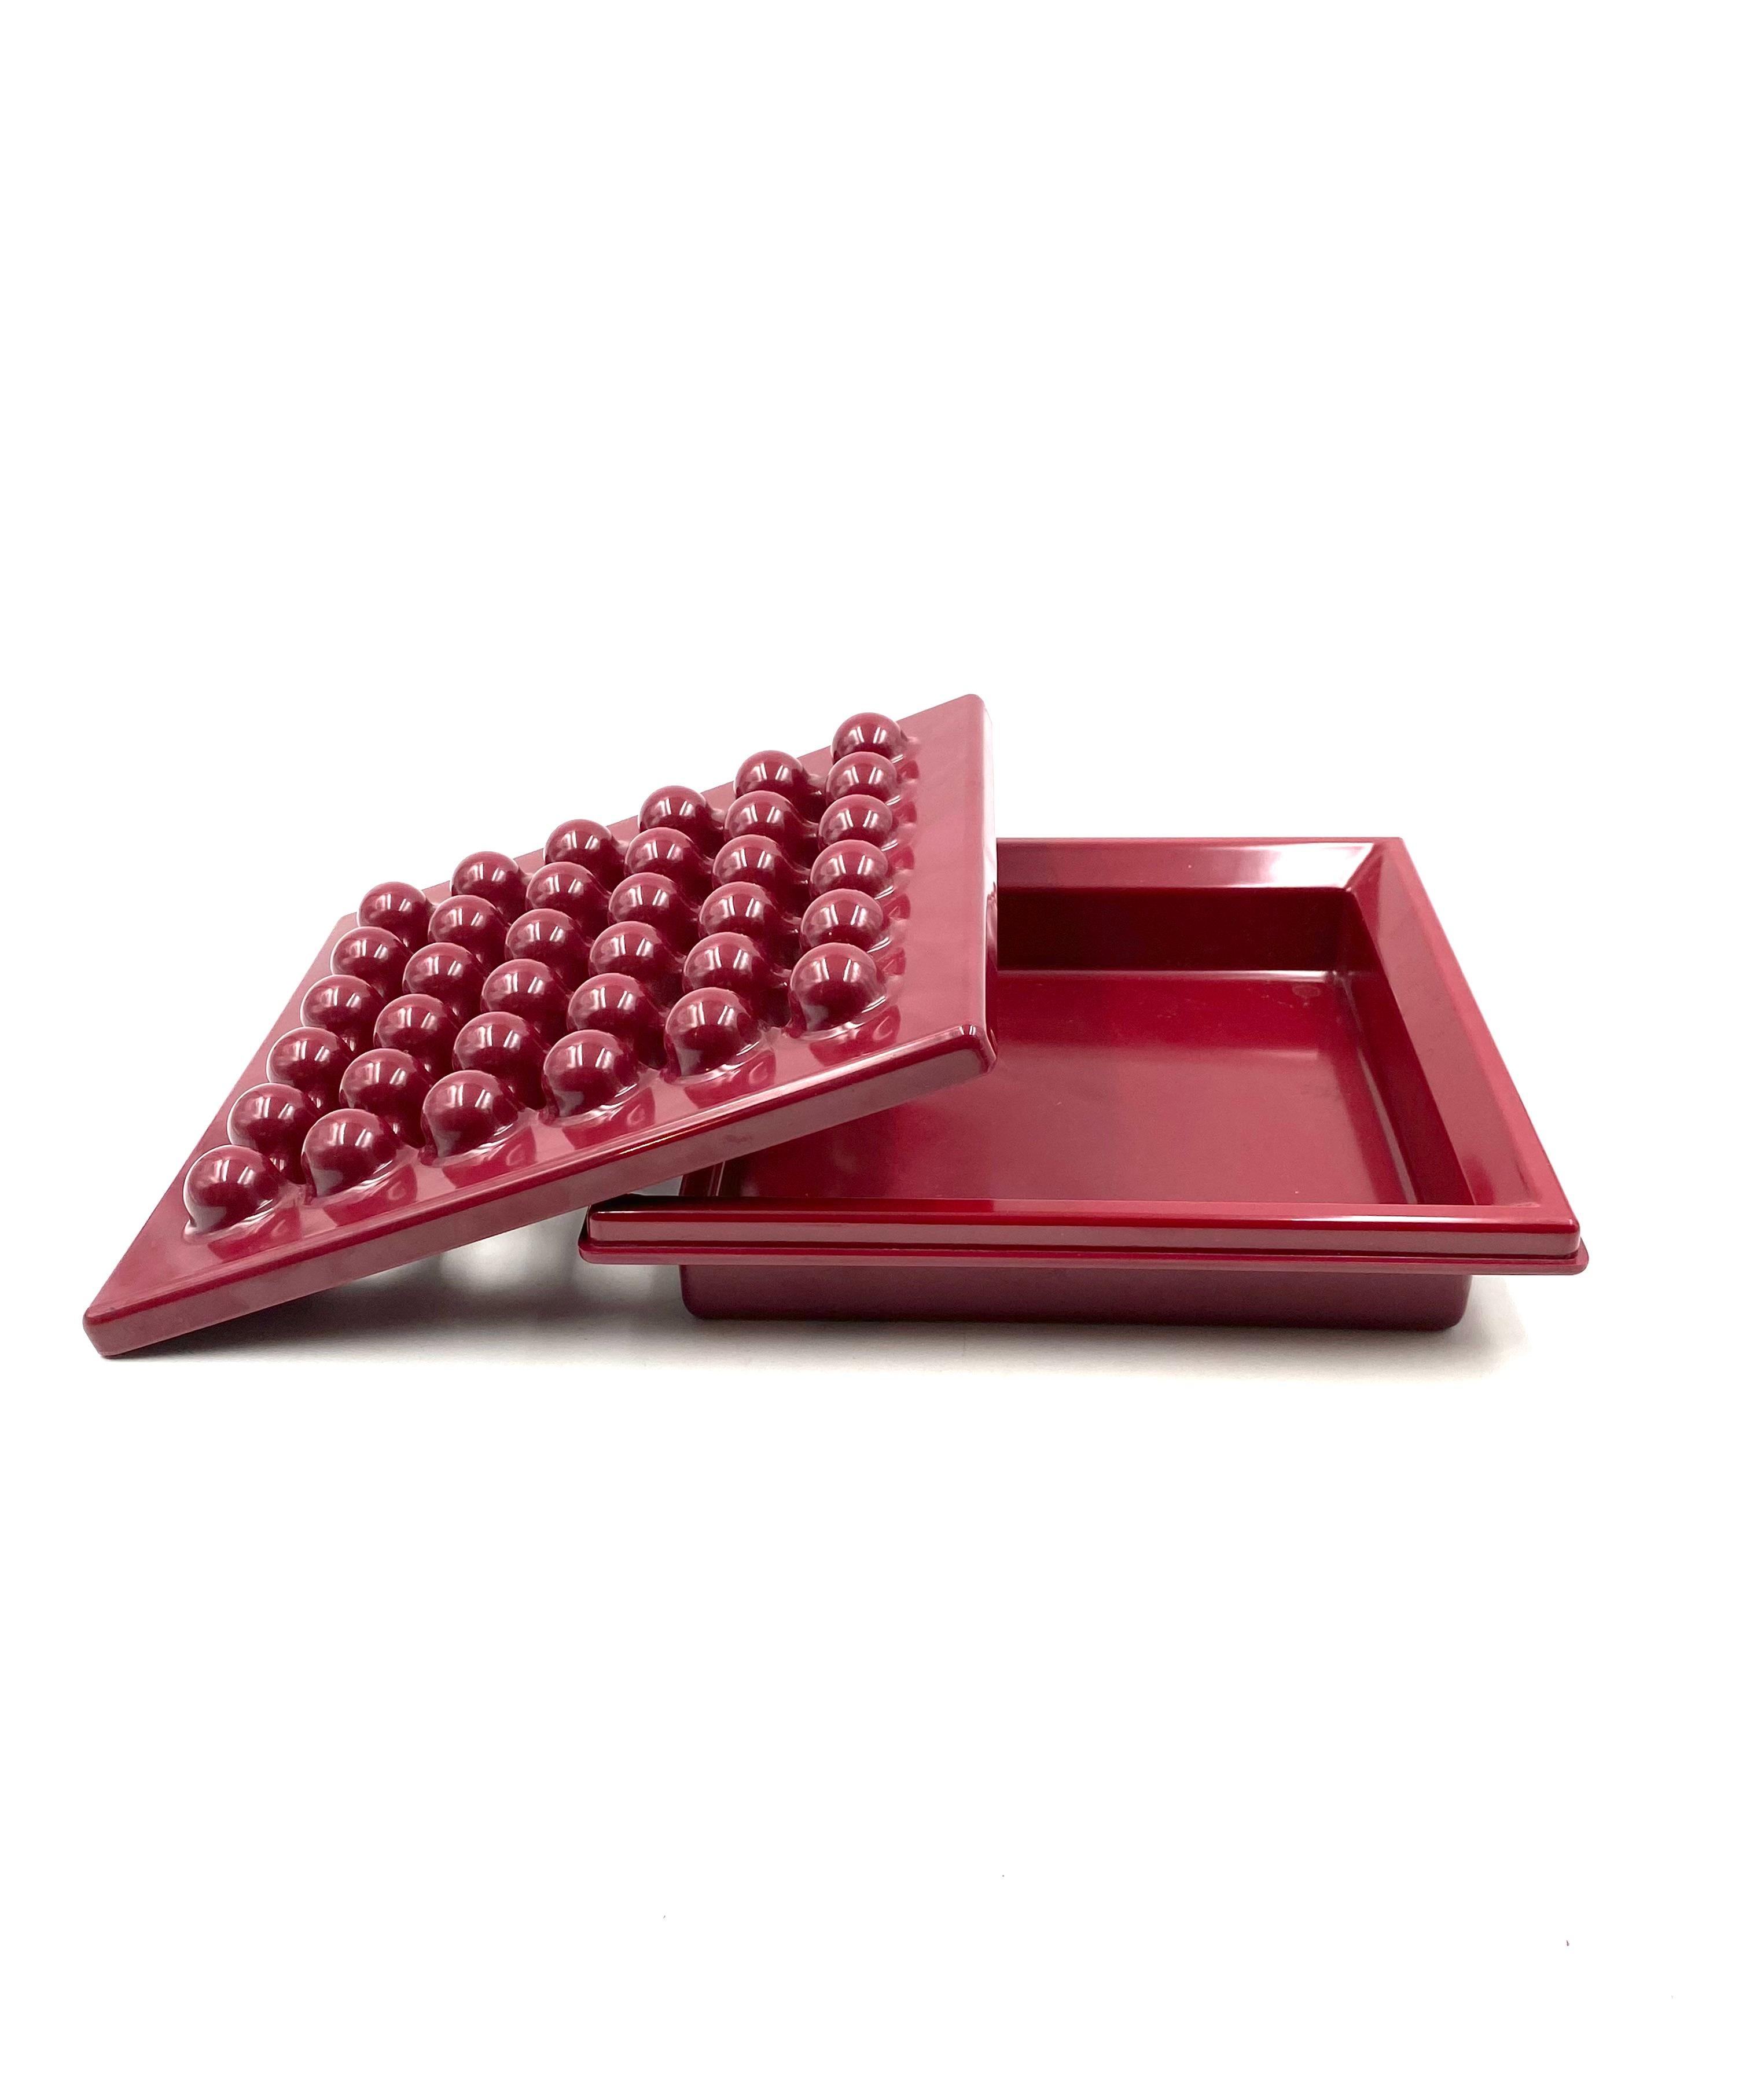 Ettore Sottsass, grand cendrier rouge, Olivetti Synthesis, série Sistema 45, 1971 6